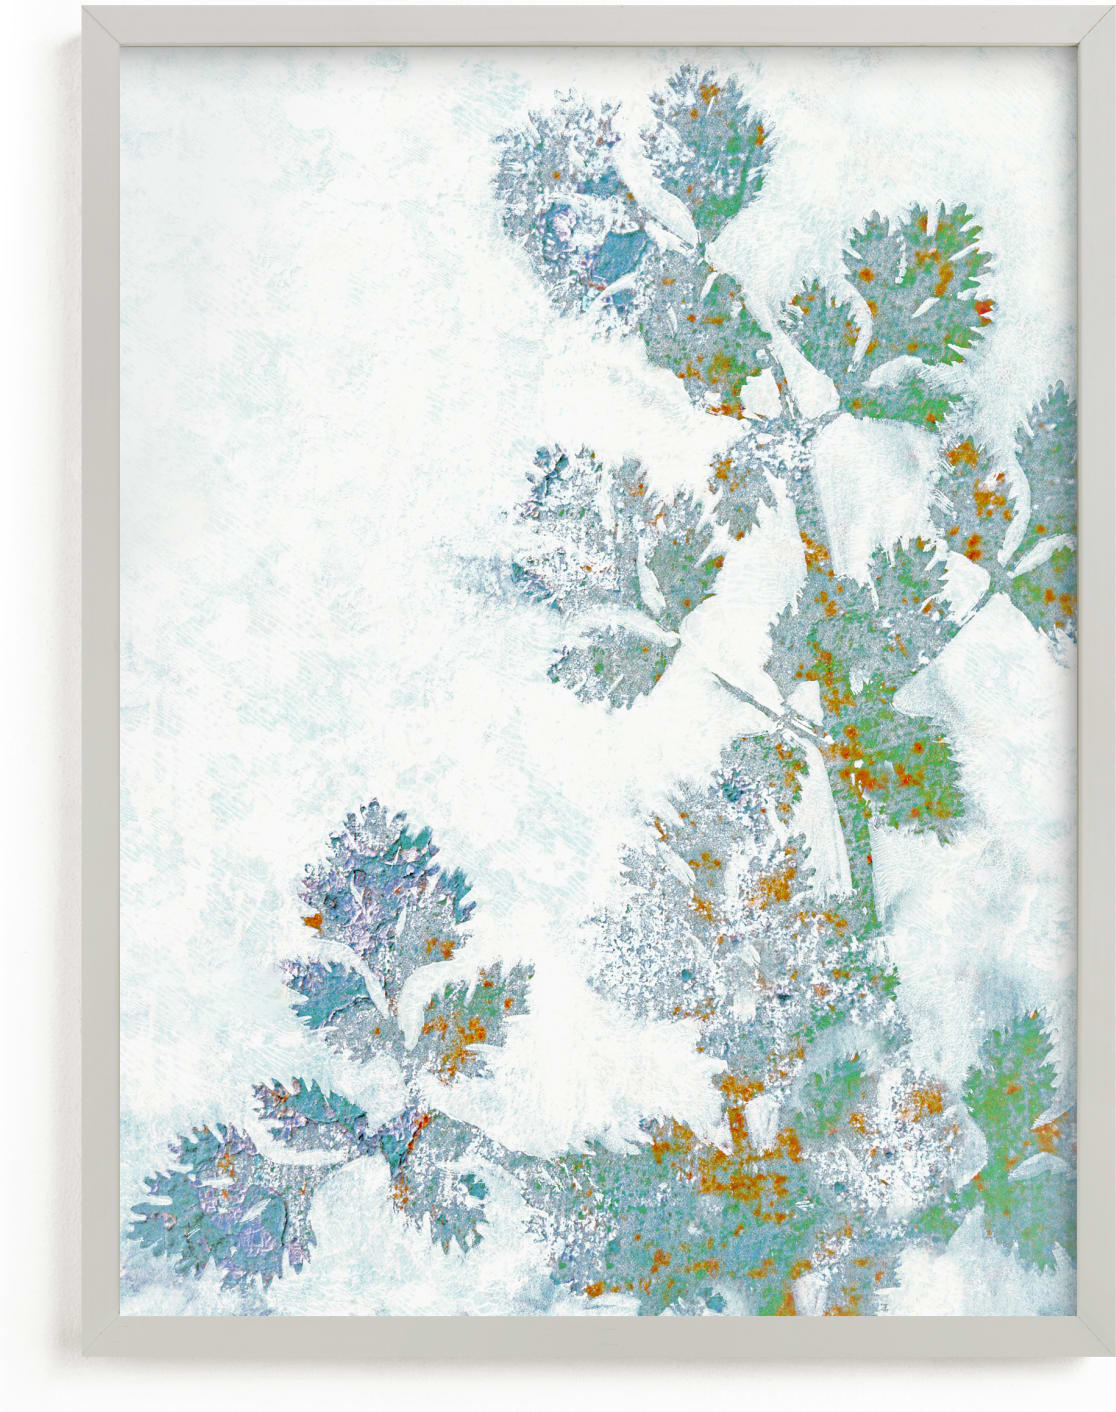 This is a white art by Courtney Crane called Rustic Herbs.